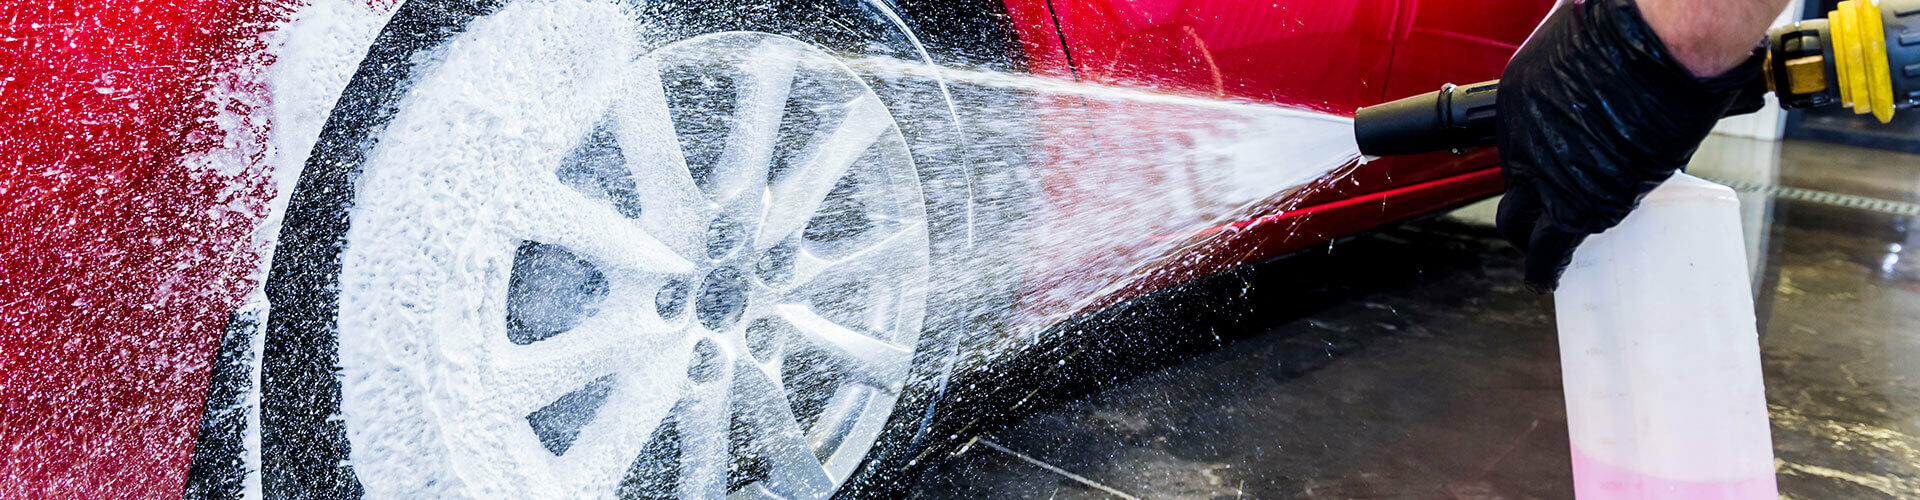 wheel-cleaning-banner